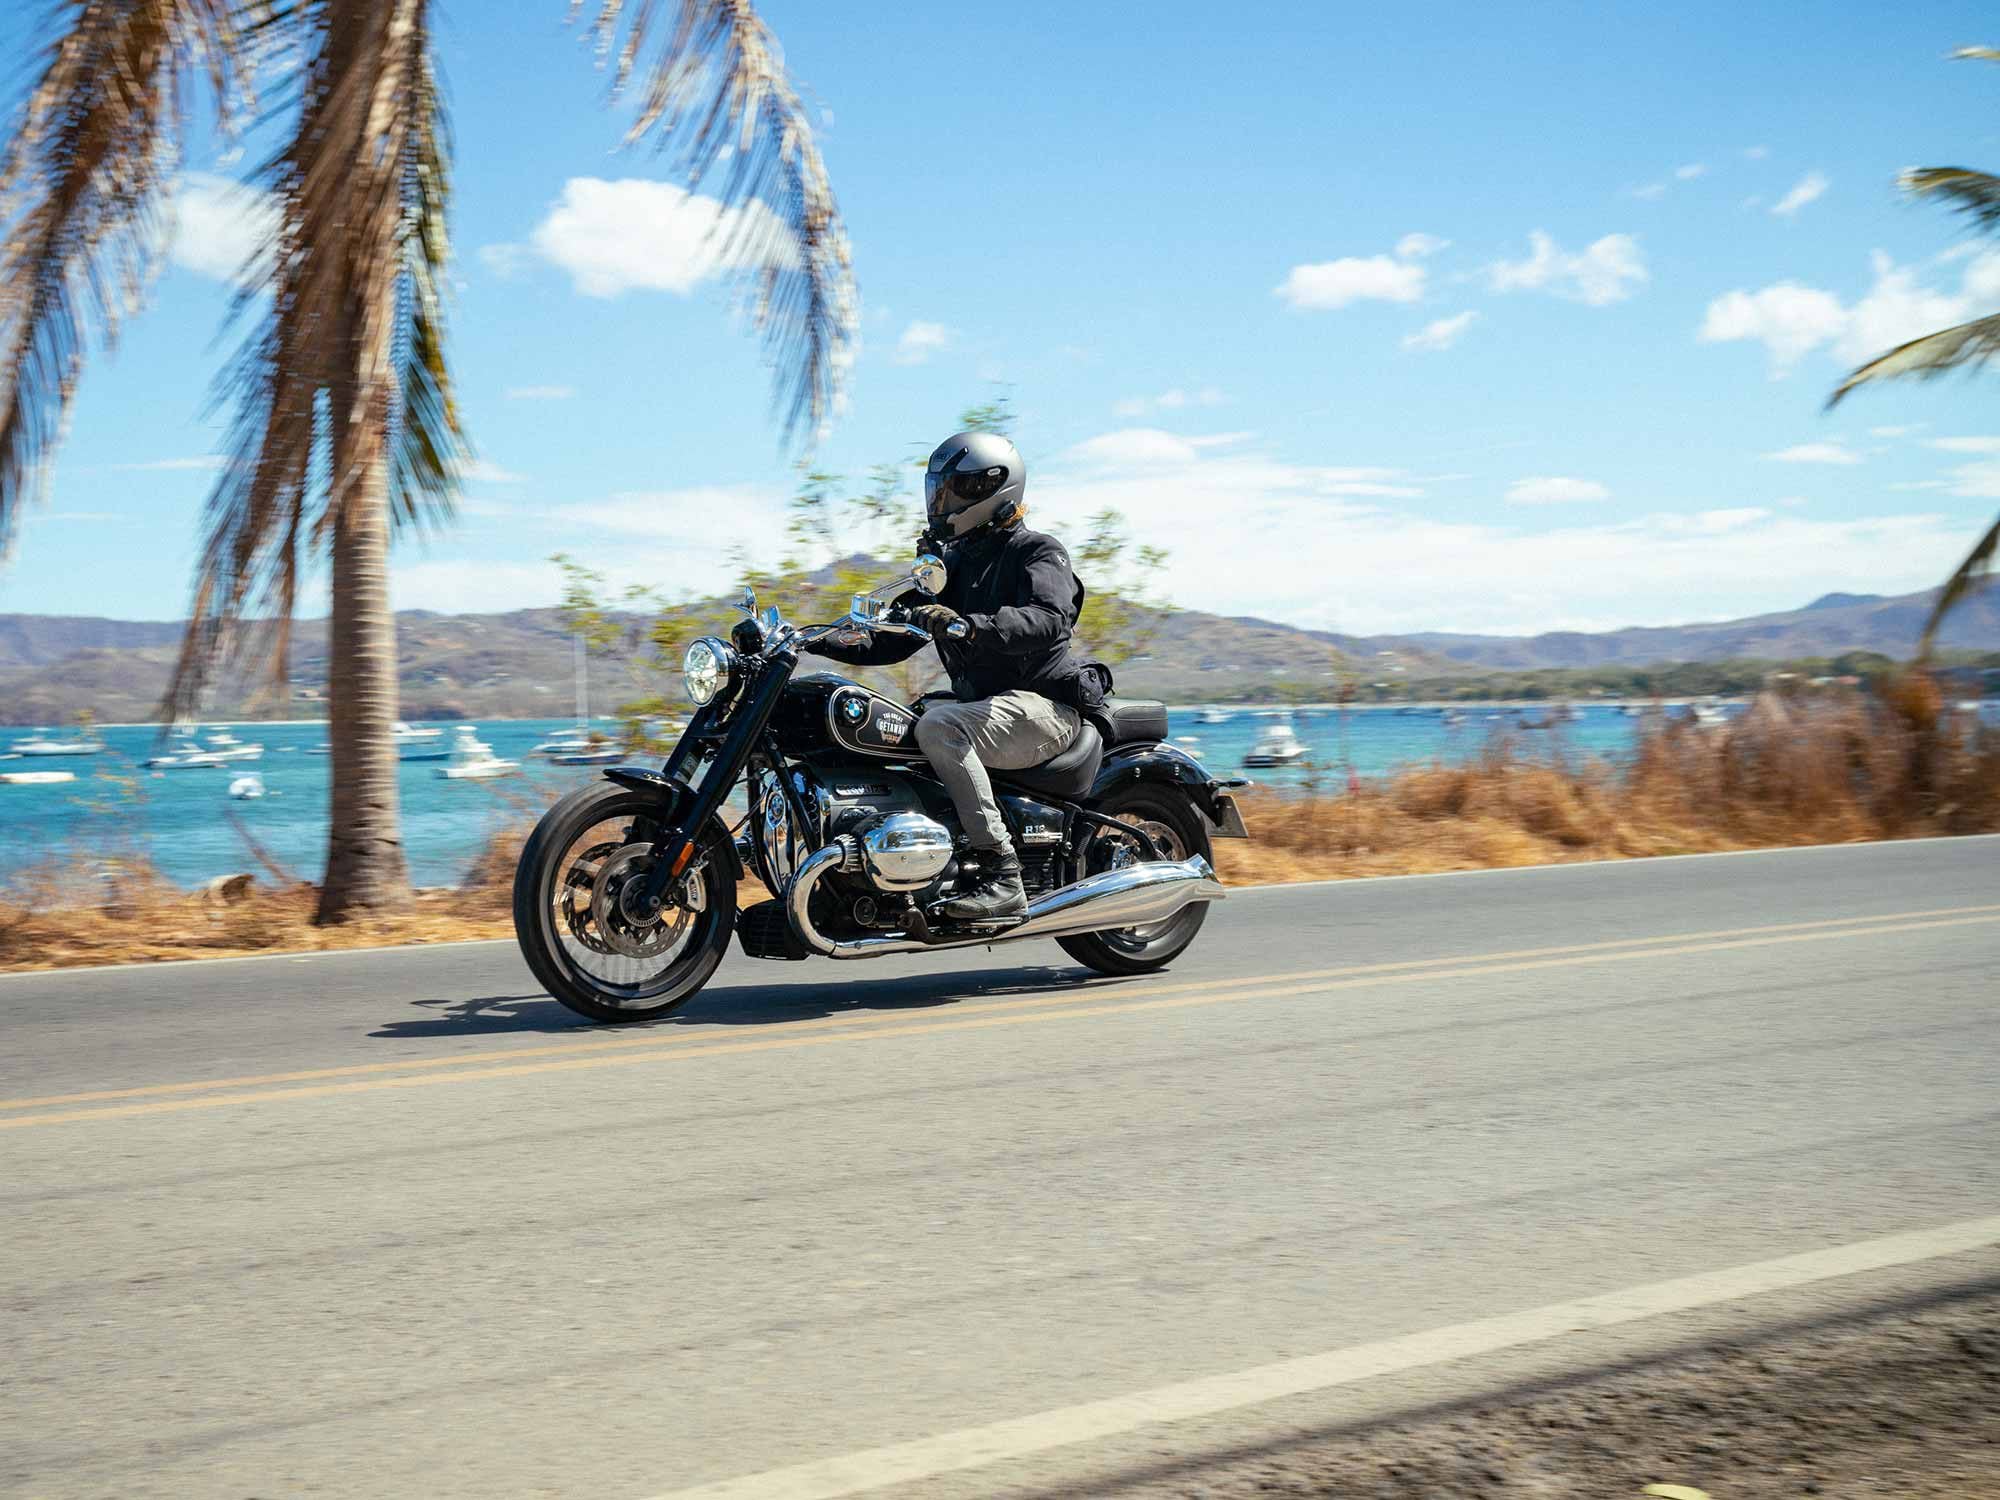 Tag along with us on R 18 cruisers during Day 3 of The Great Getaway with BMW Motorrad.